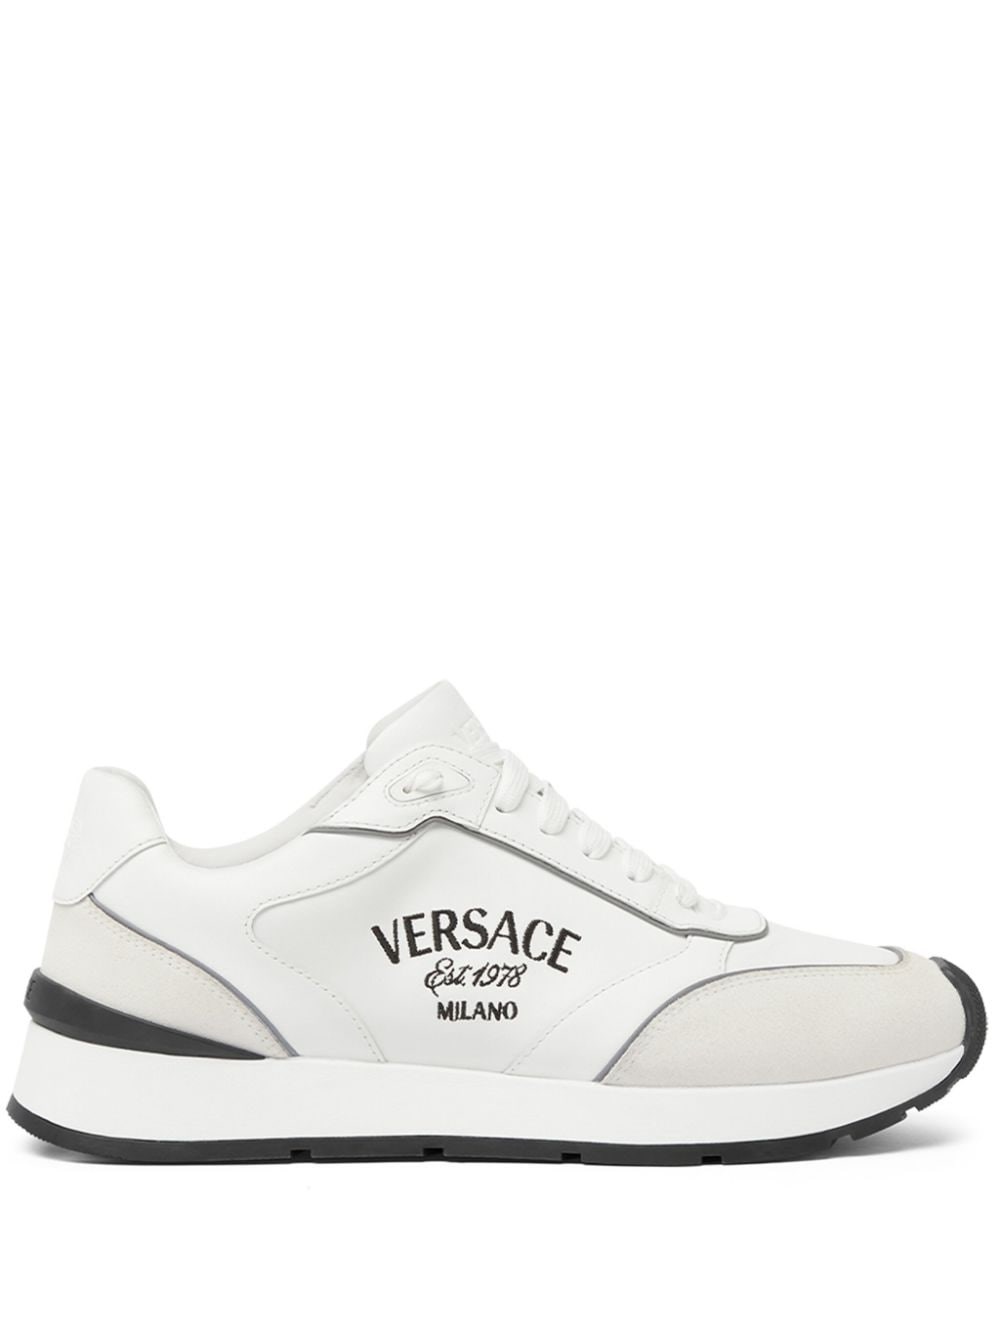 Shop Versace Sneakers Milano In White